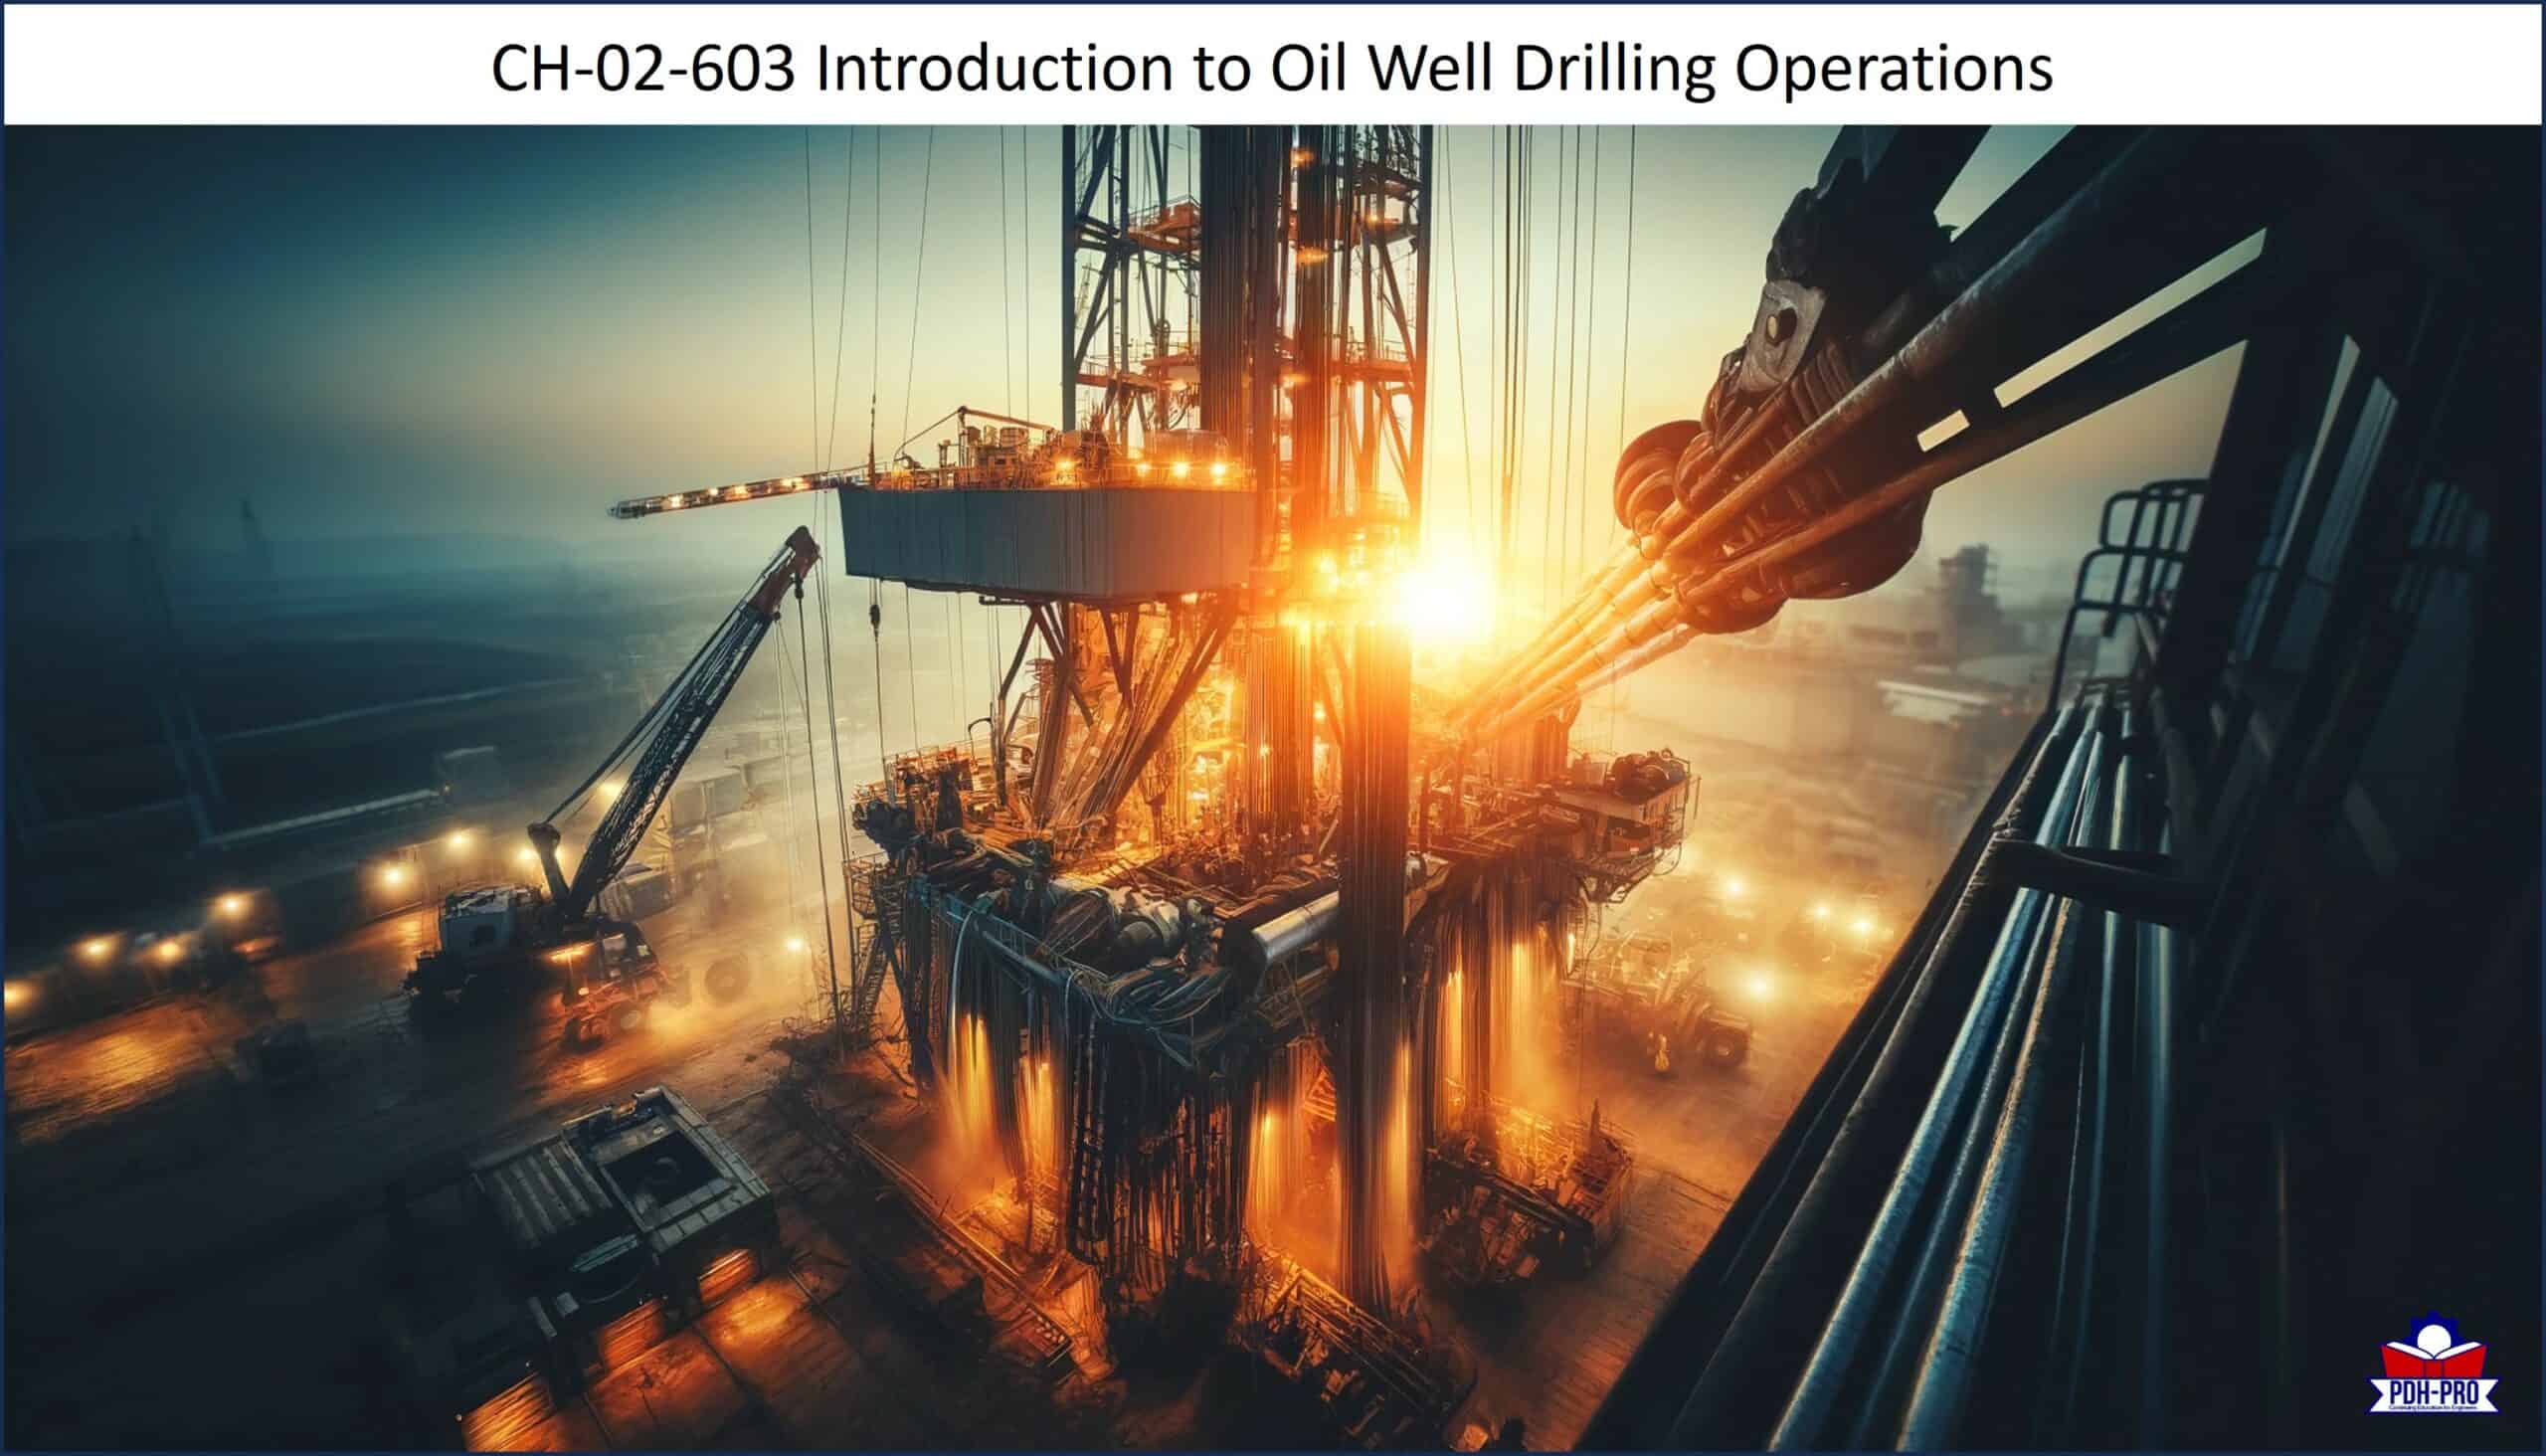 Introduction to Oil Well Drilling Operations